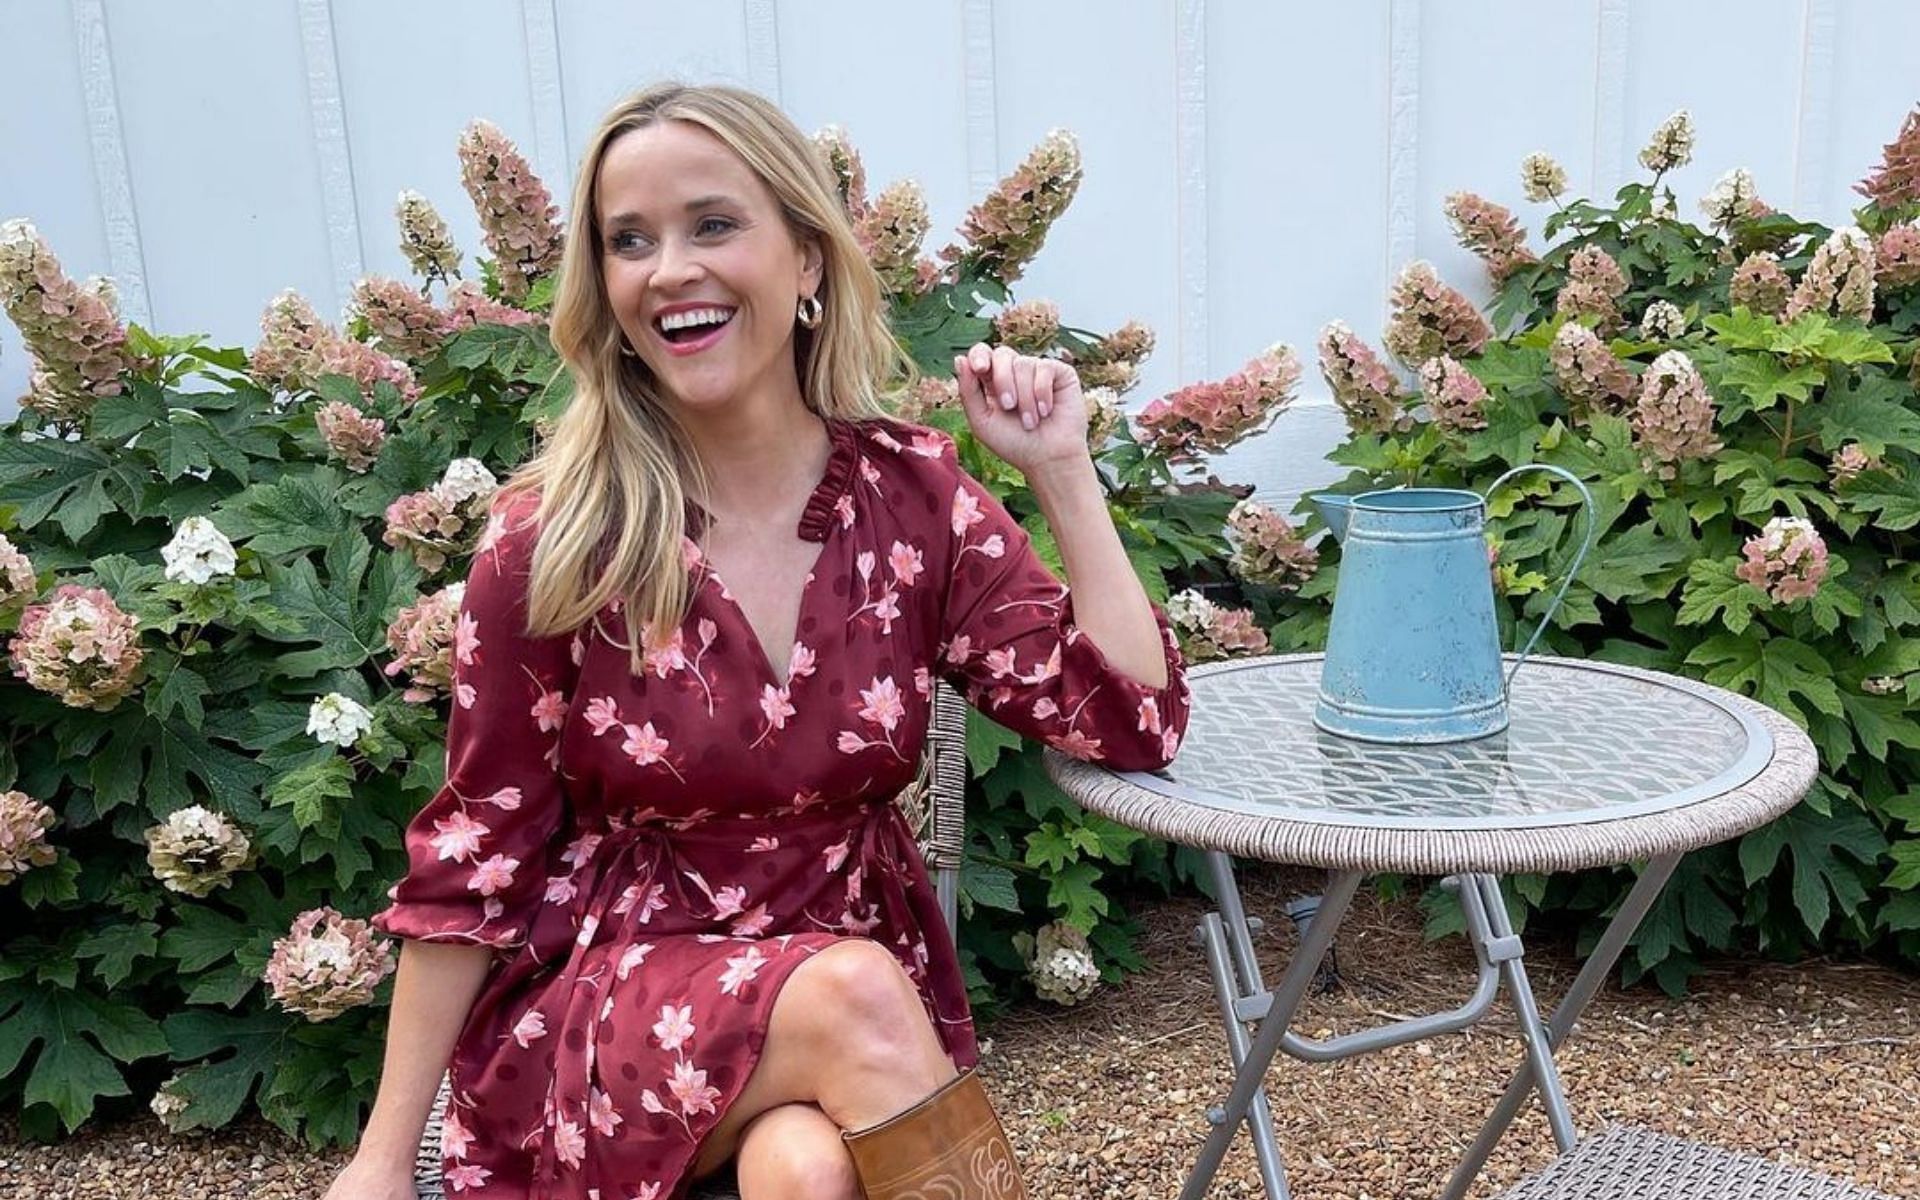 Reese Witherspoon enjoying a fun moment (Image via reesewitherspoon/Instagram)